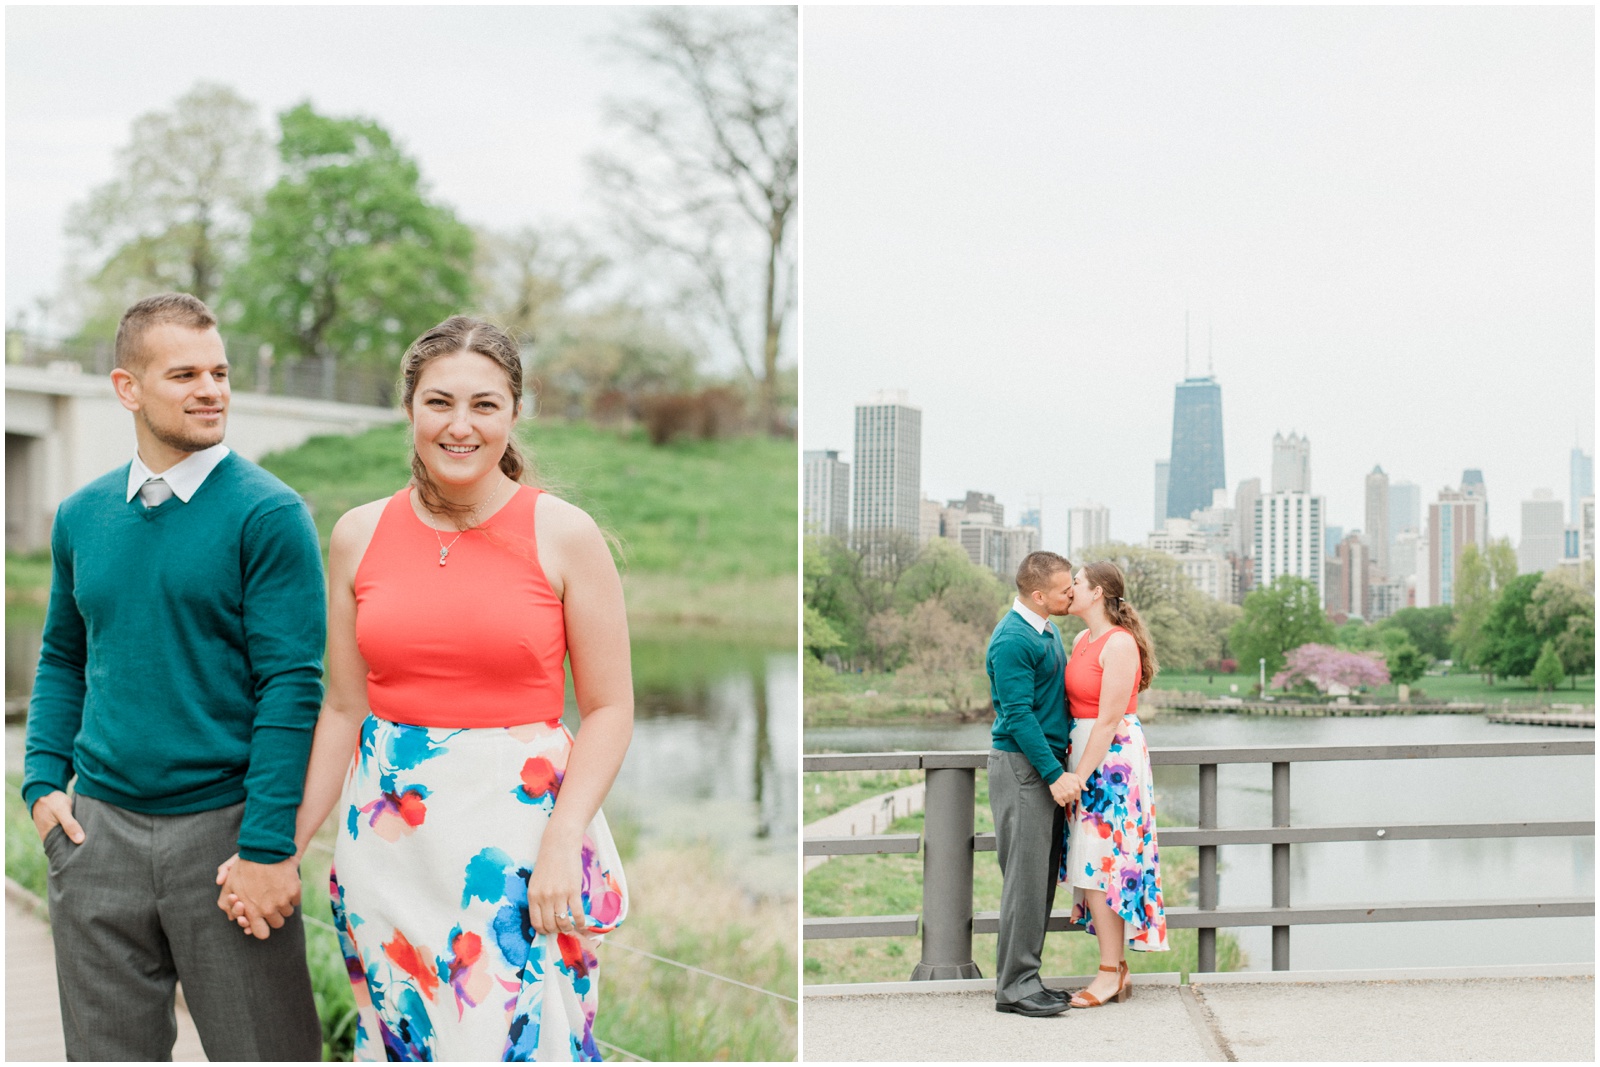 Spring Engagement Chicago | Couple walking in park